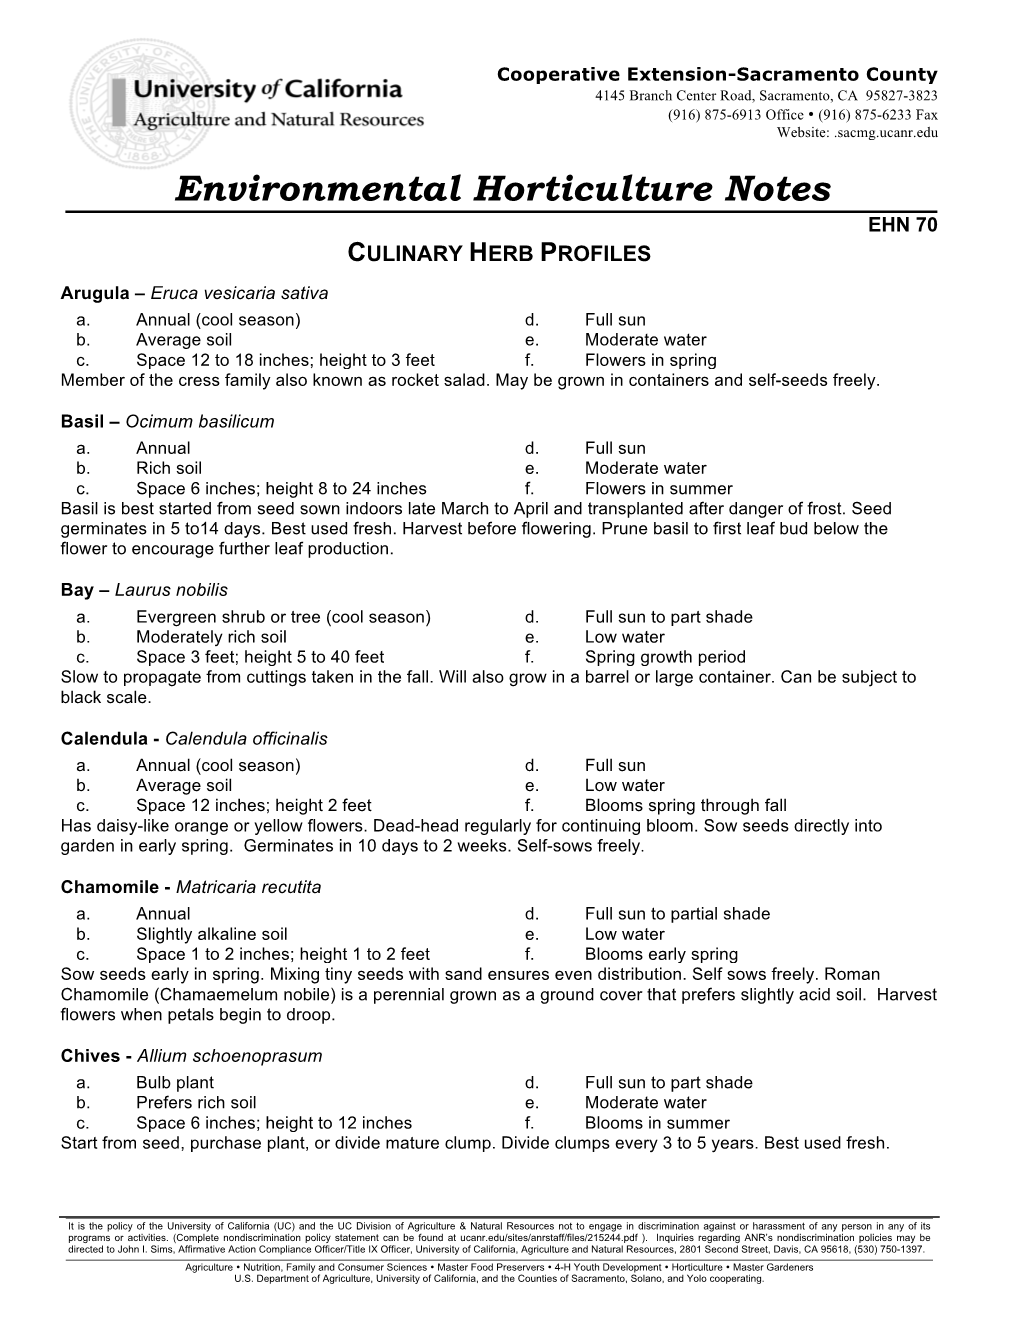 Environmental Horticulture Notes EHN 70 CULINARY HERB PROFILES